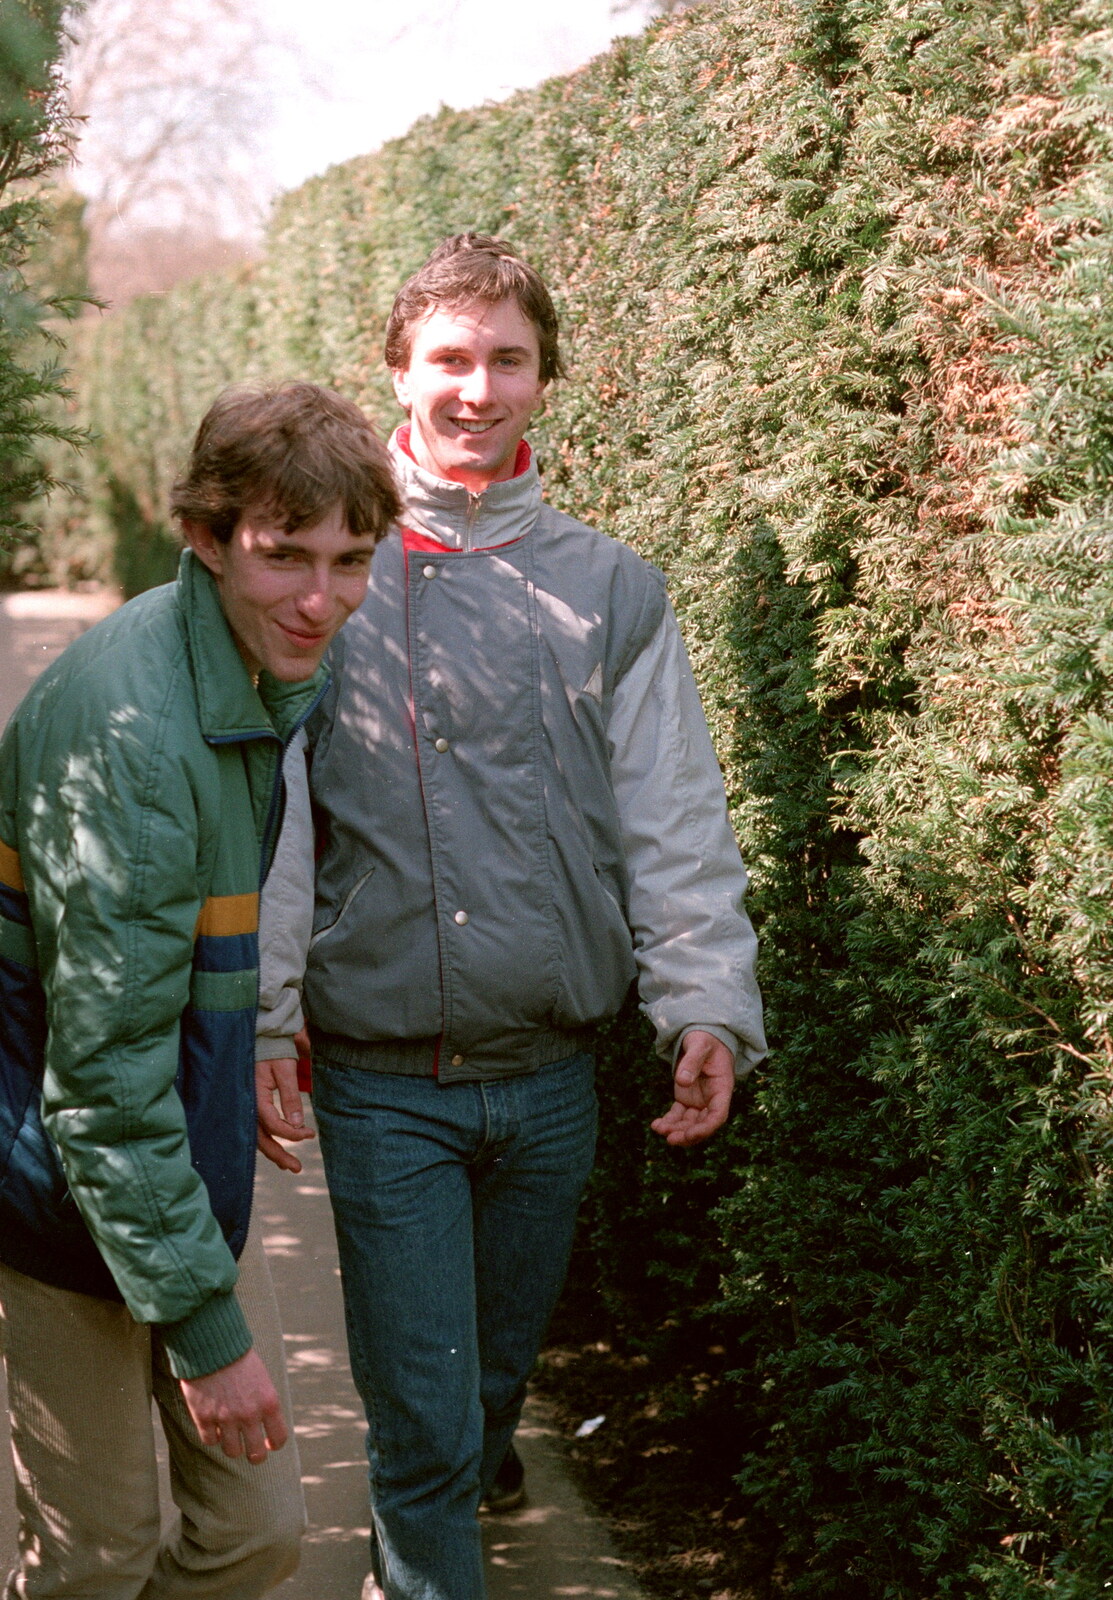 Dave and Riki in the maze from Trotsky's Birthday, New Malden, Kingston Upon Thames - 20th April 1986